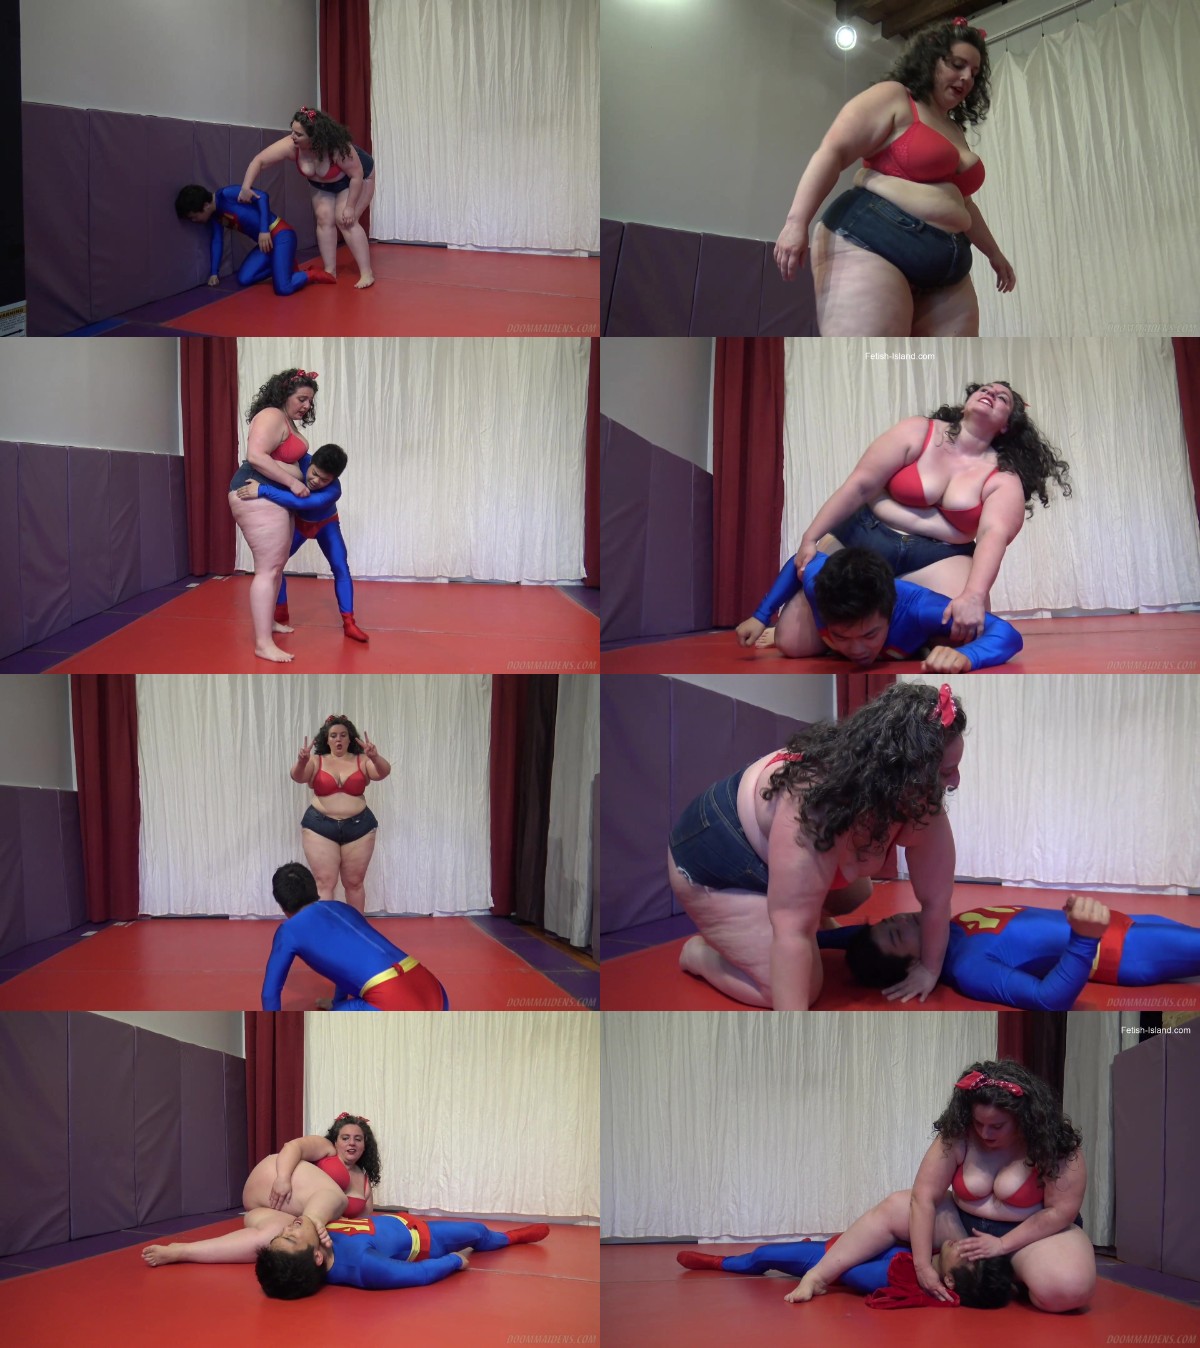 Queen Ursas Super Toy Pro-Style Mixed Wrestling Domination with Ursa Fierce and Dachi